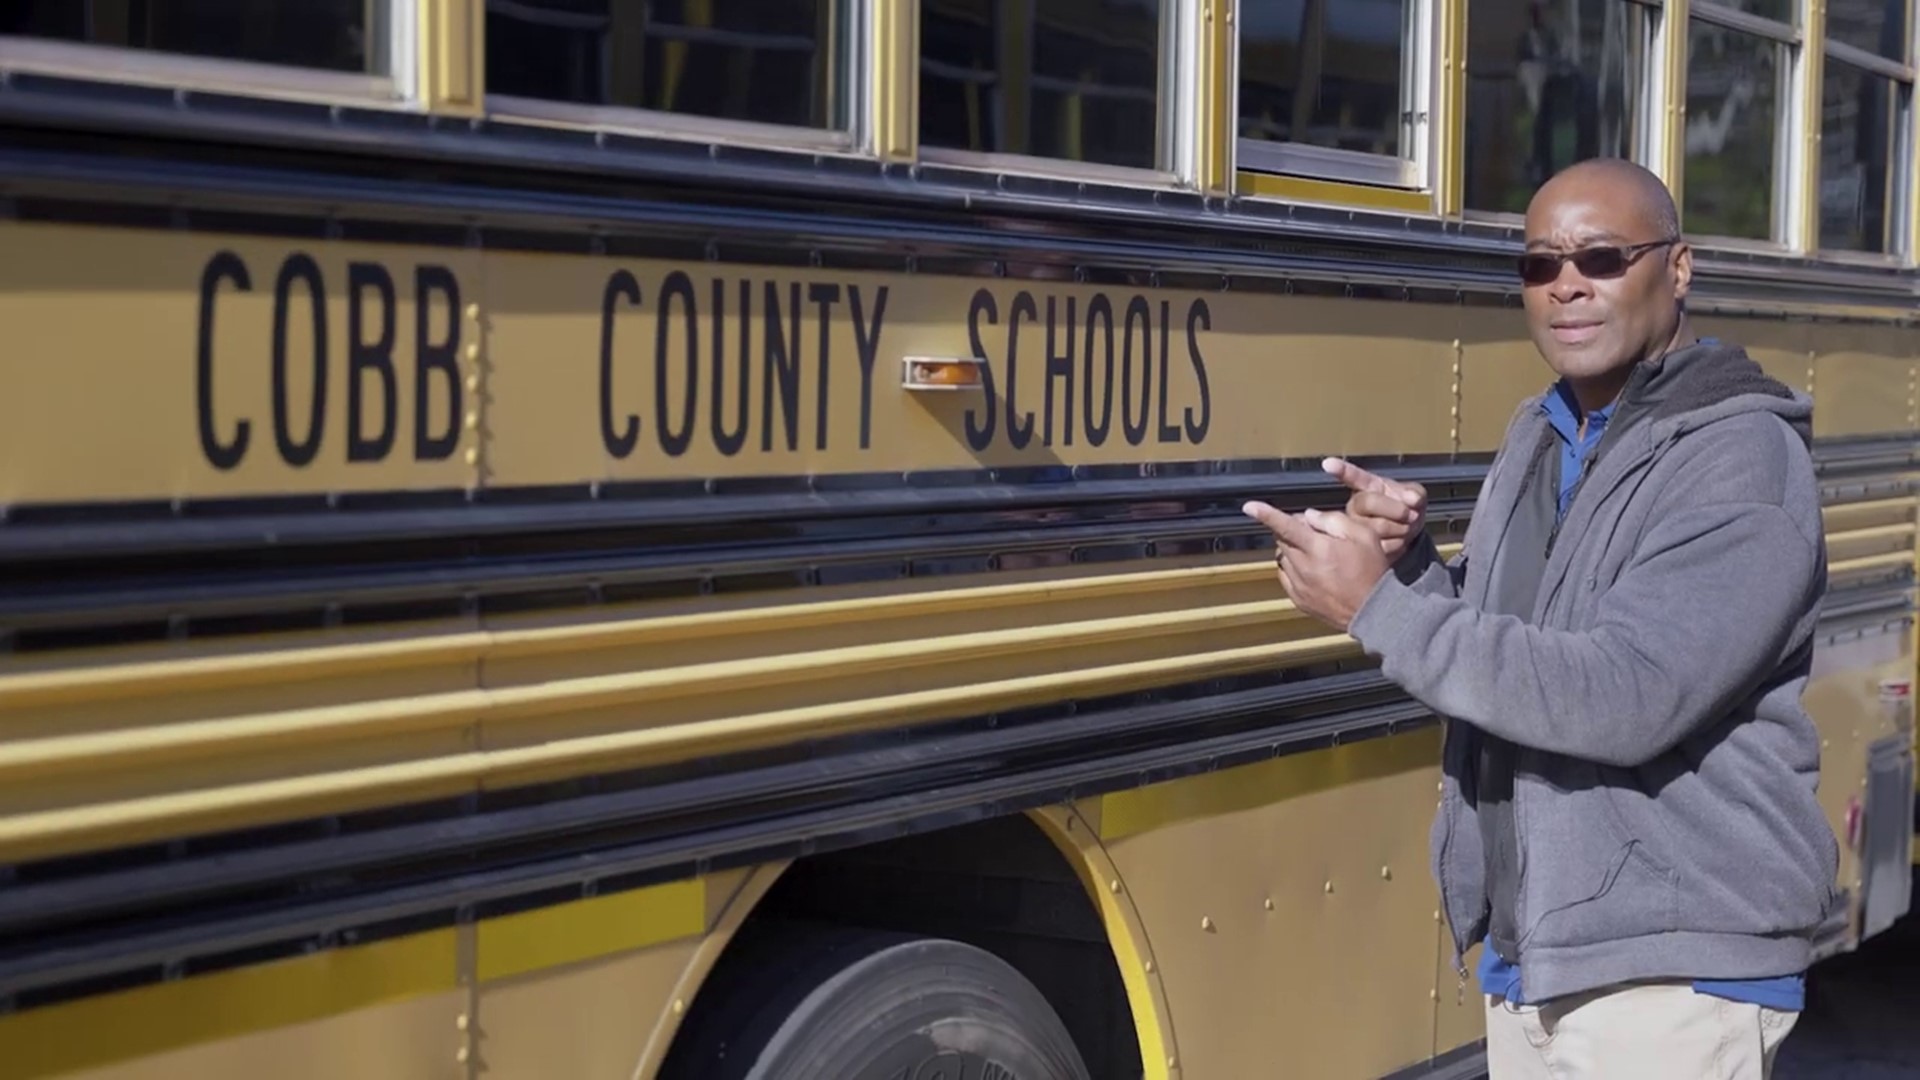 A Cobb Schools bus driver with just one month under his belt has already earned the title of hero after saving a student's life on his route.